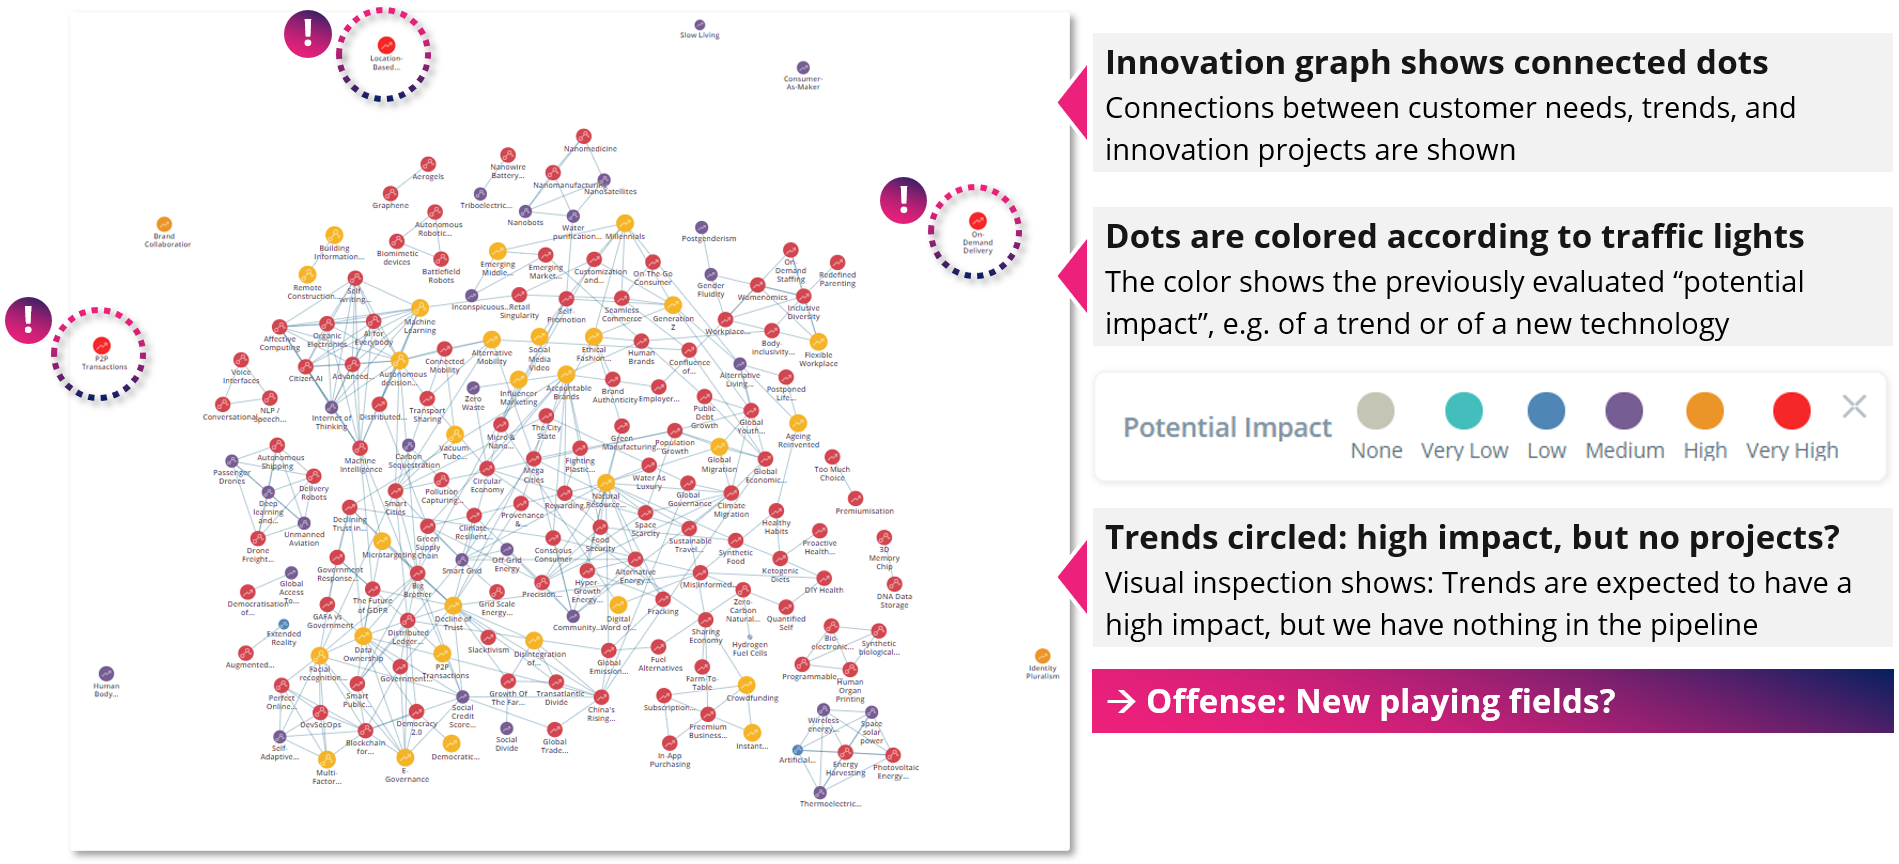 Innovation graphs and networks